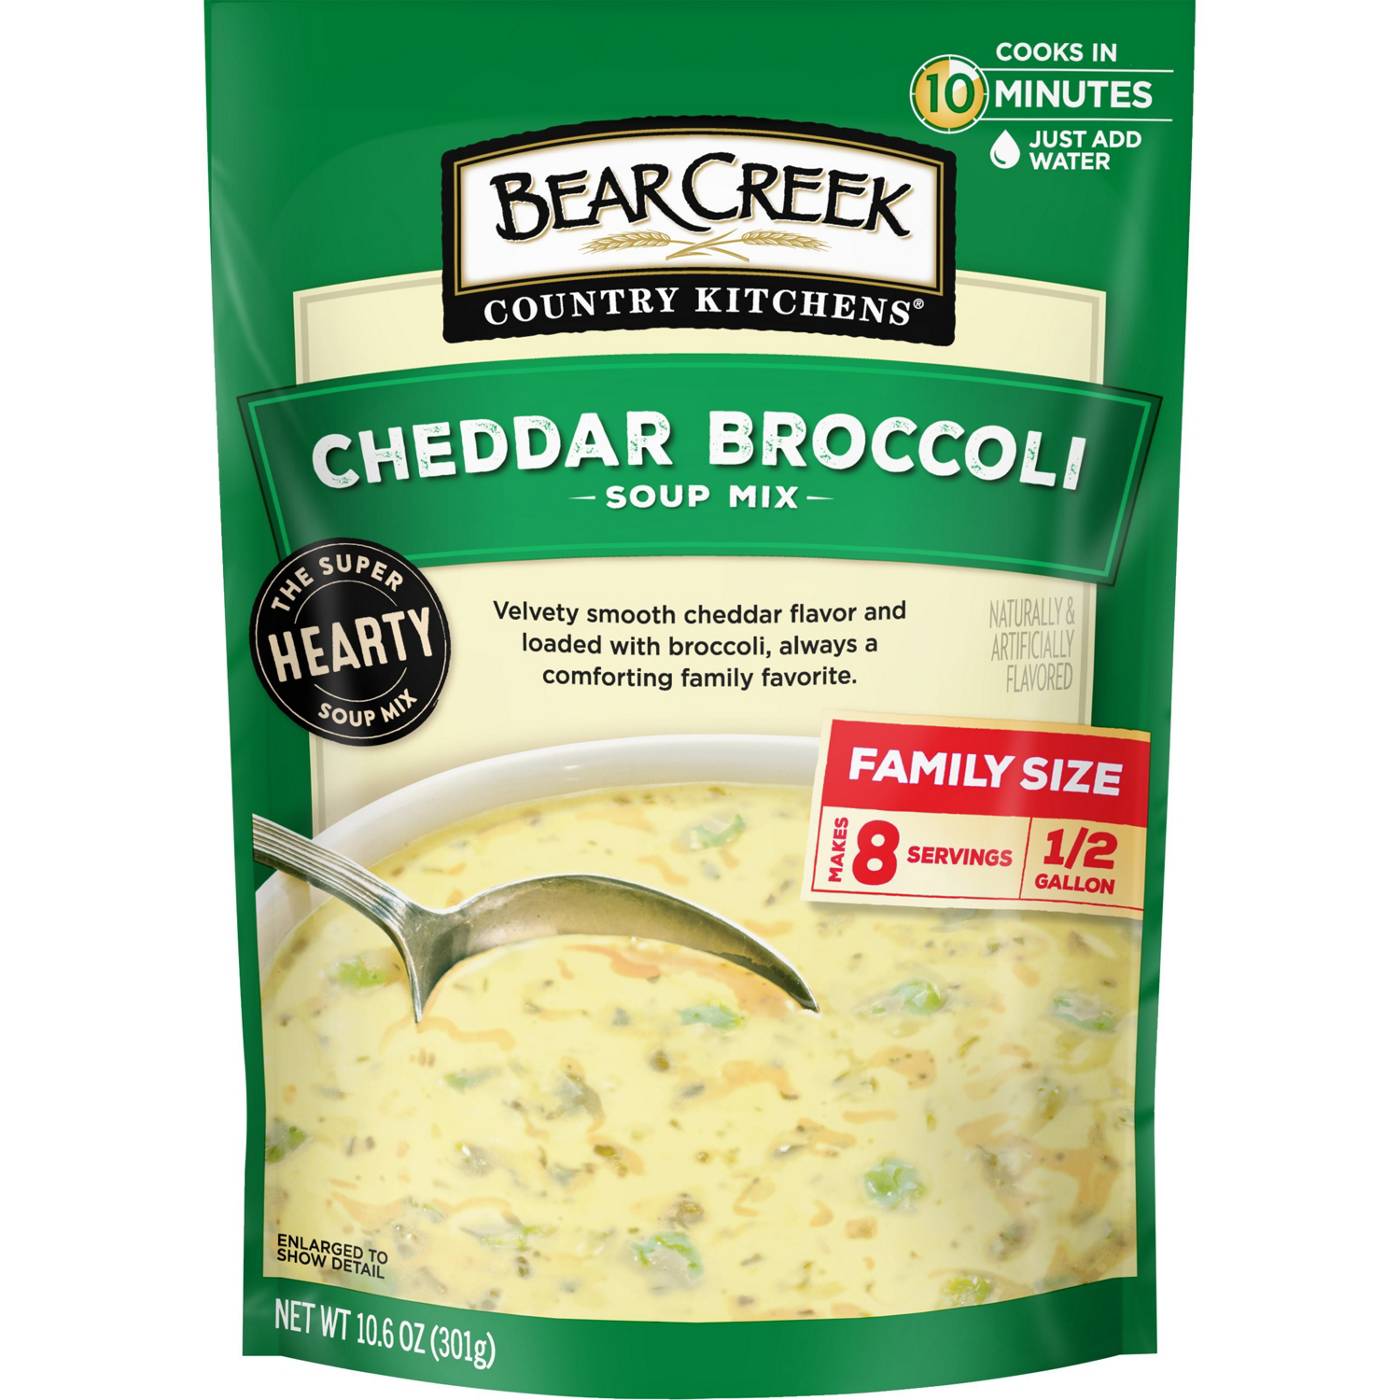 Bear Creek Country Kitchens Cheddar Broccoli Soup Mix; image 1 of 3